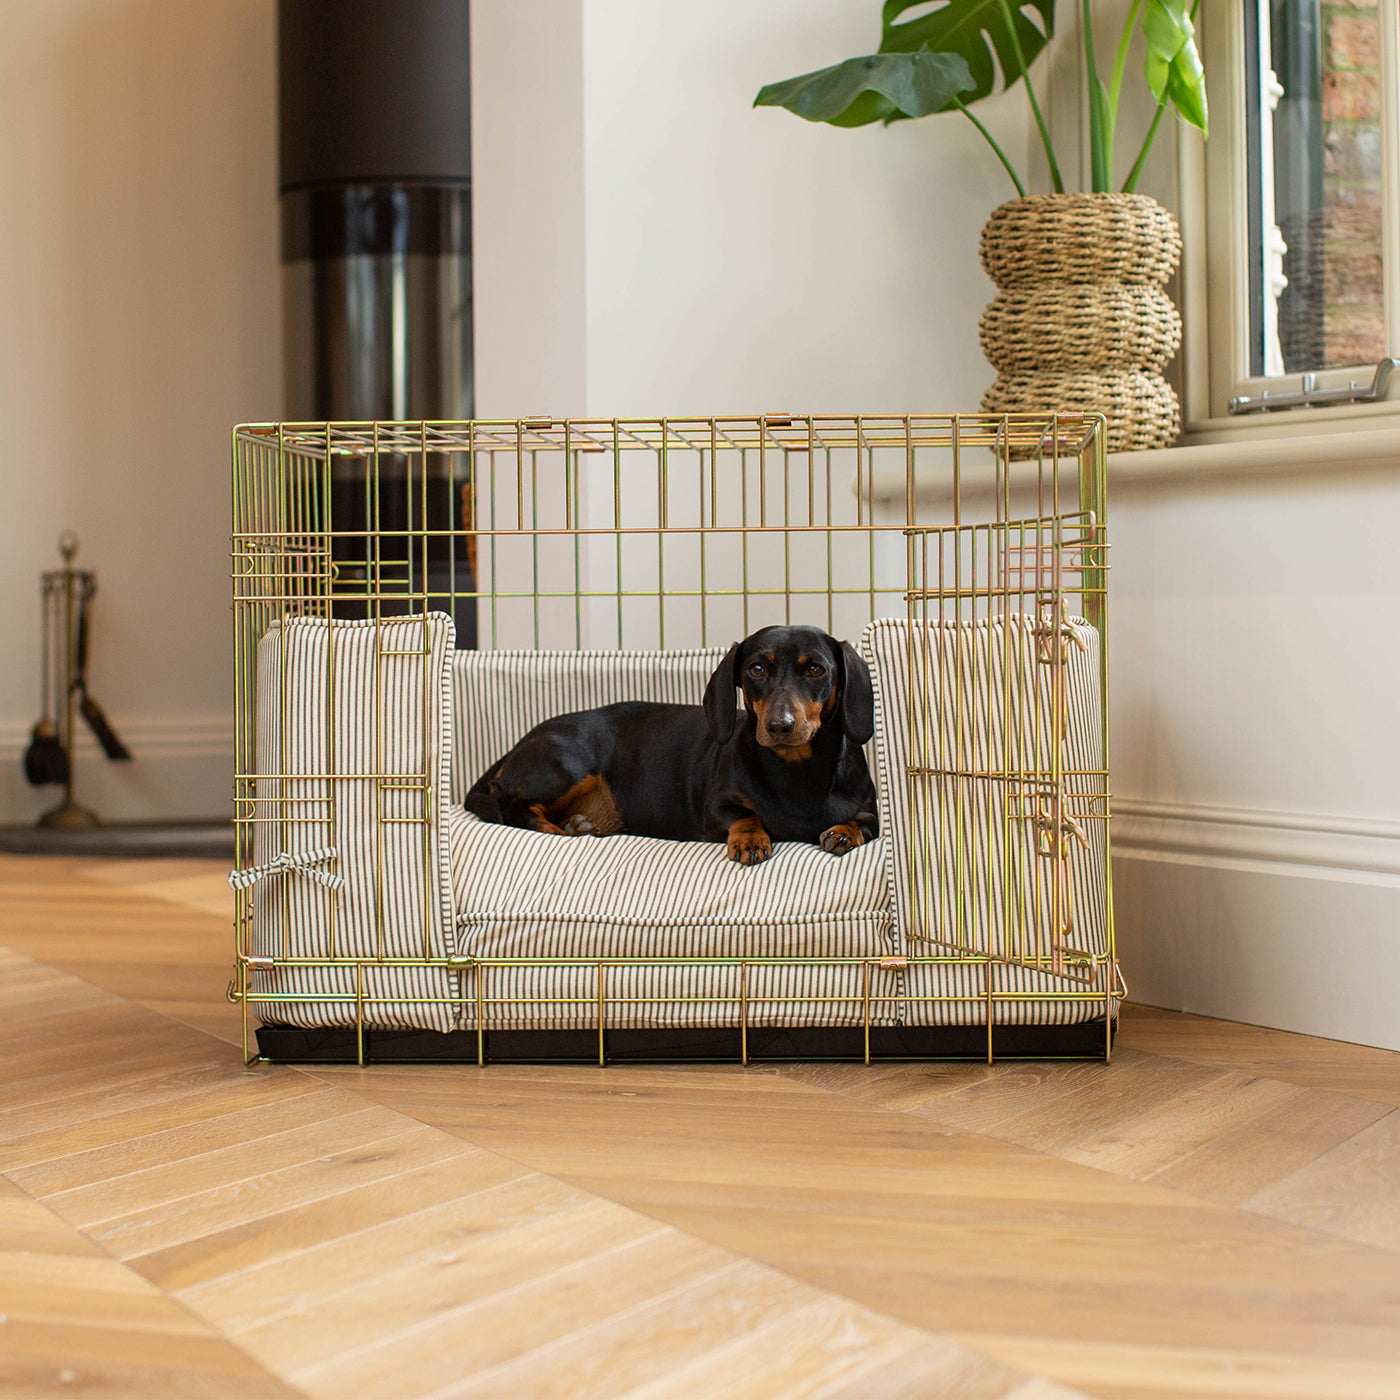 Luxury Heavy Duty Dog Crate, In Stunning Regency Stripe Crate Set, The Perfect Dog Crate Set For Building The Ultimate Pet Den! Dog Crate Cover Available To Personalise at Lords & Labradors